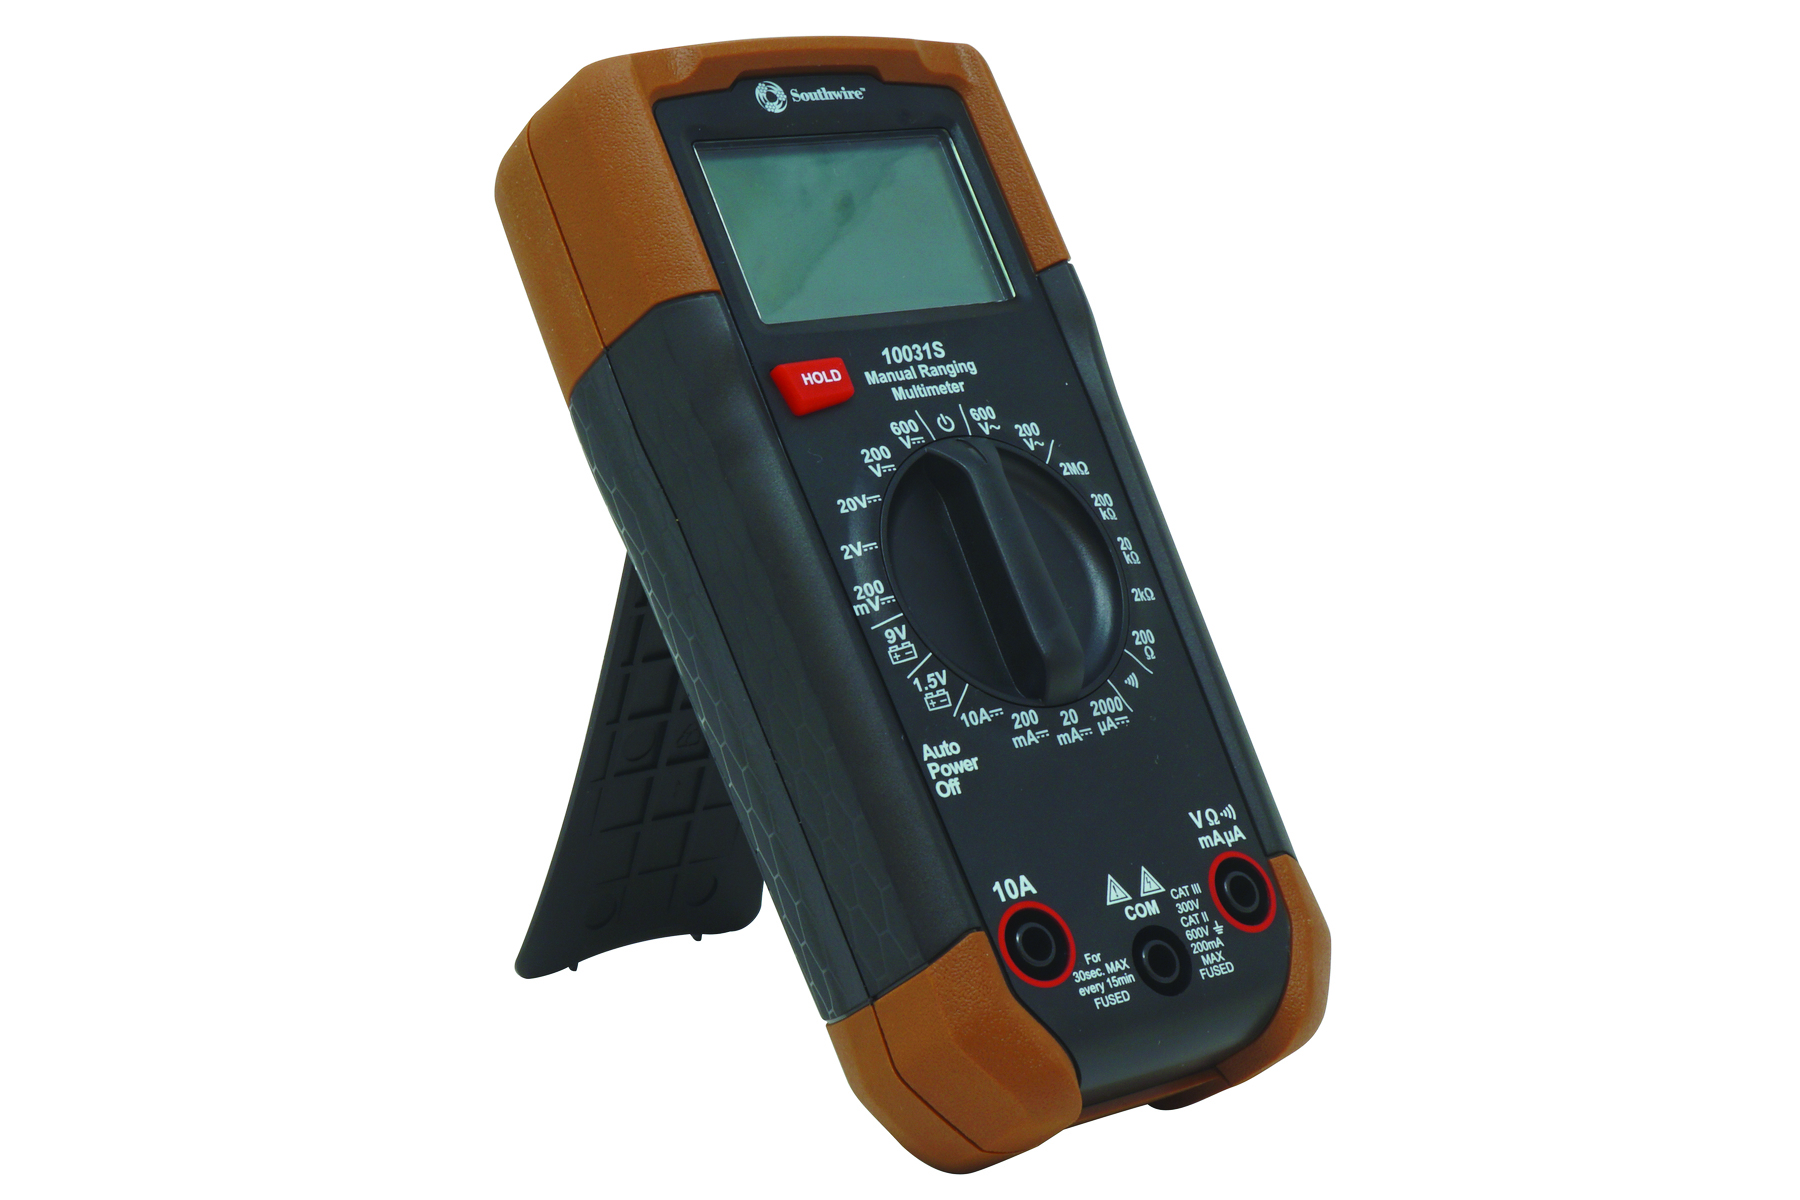 Southwire Multimeter